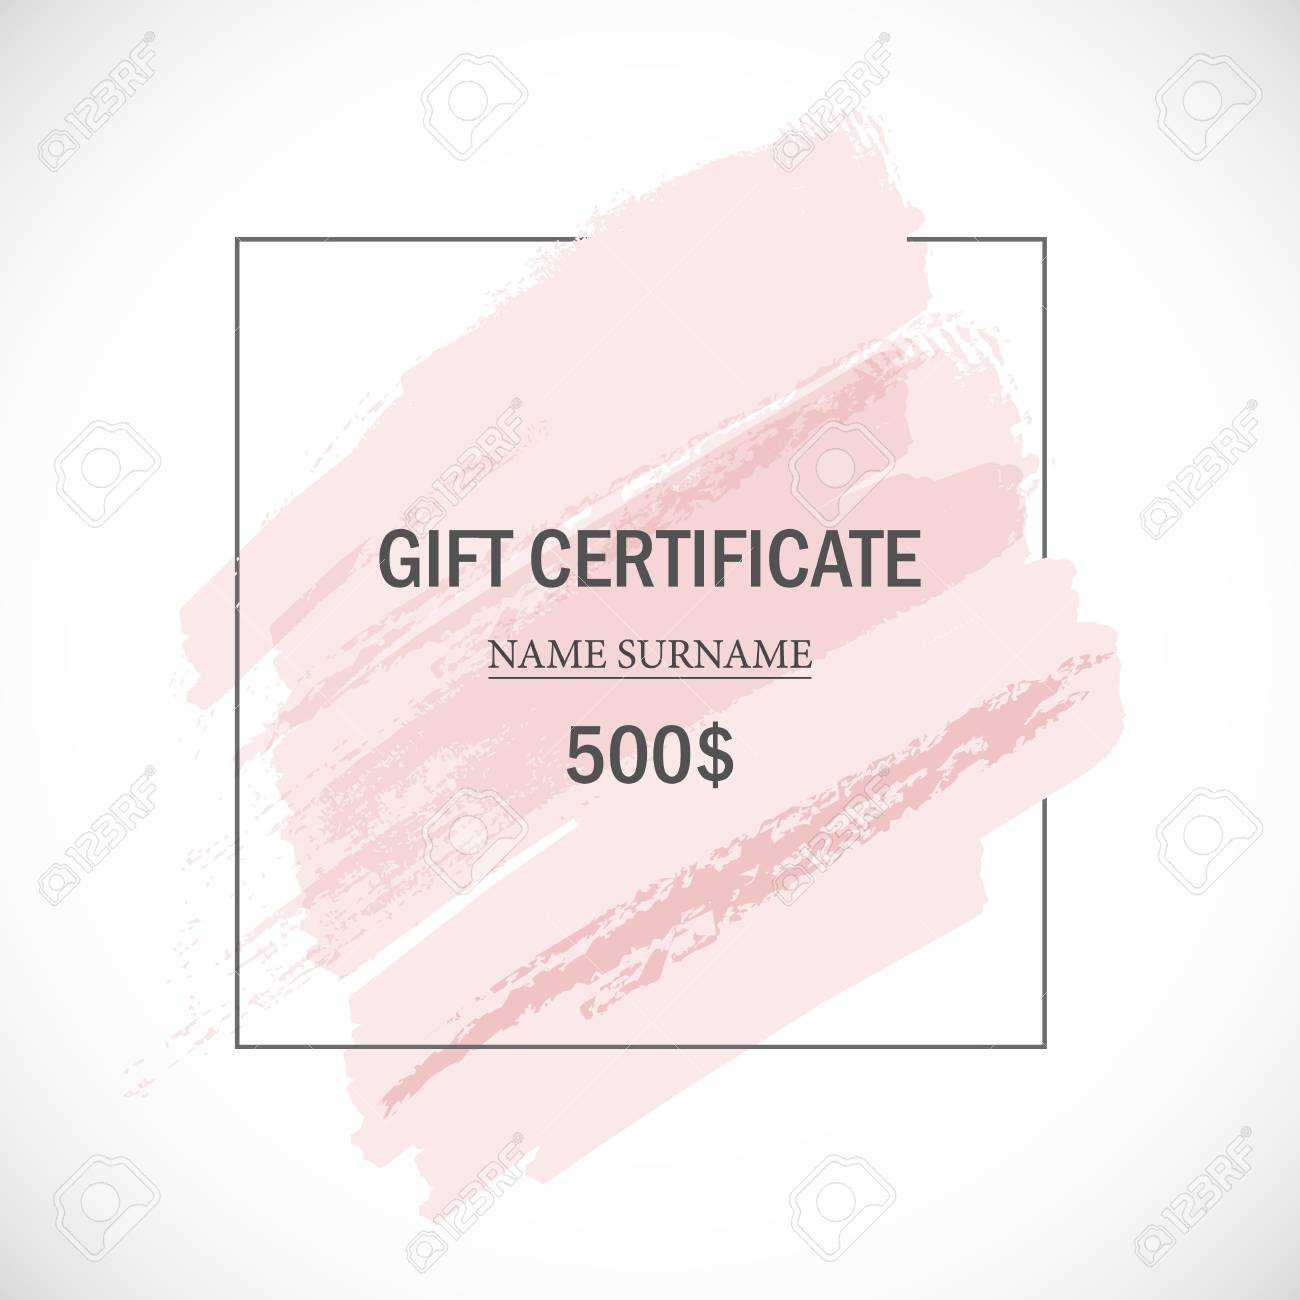 Pink Gift Certificate Template. Pertaining To Pink Gift Certificate Template